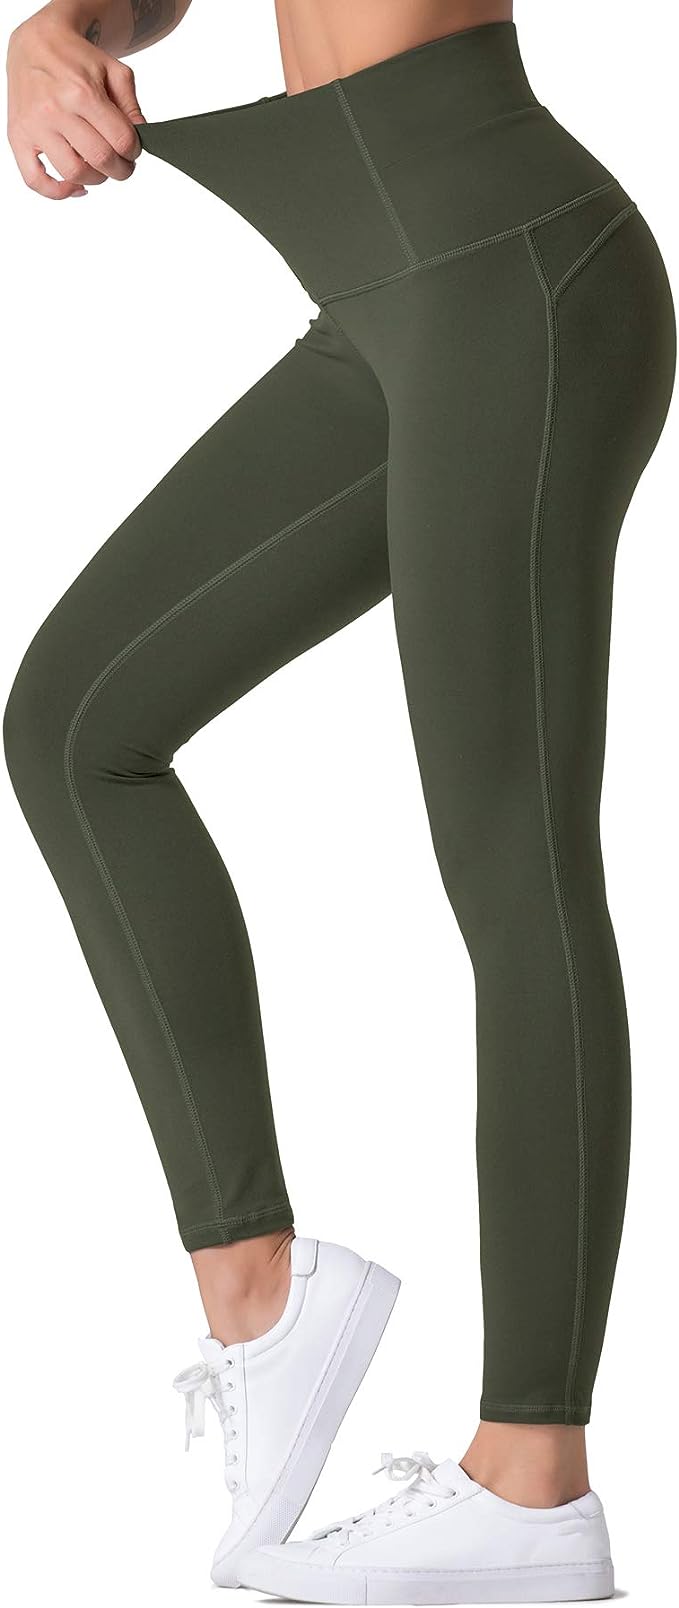  THE GYM PEOPLE Tummy Control Workout Leggings